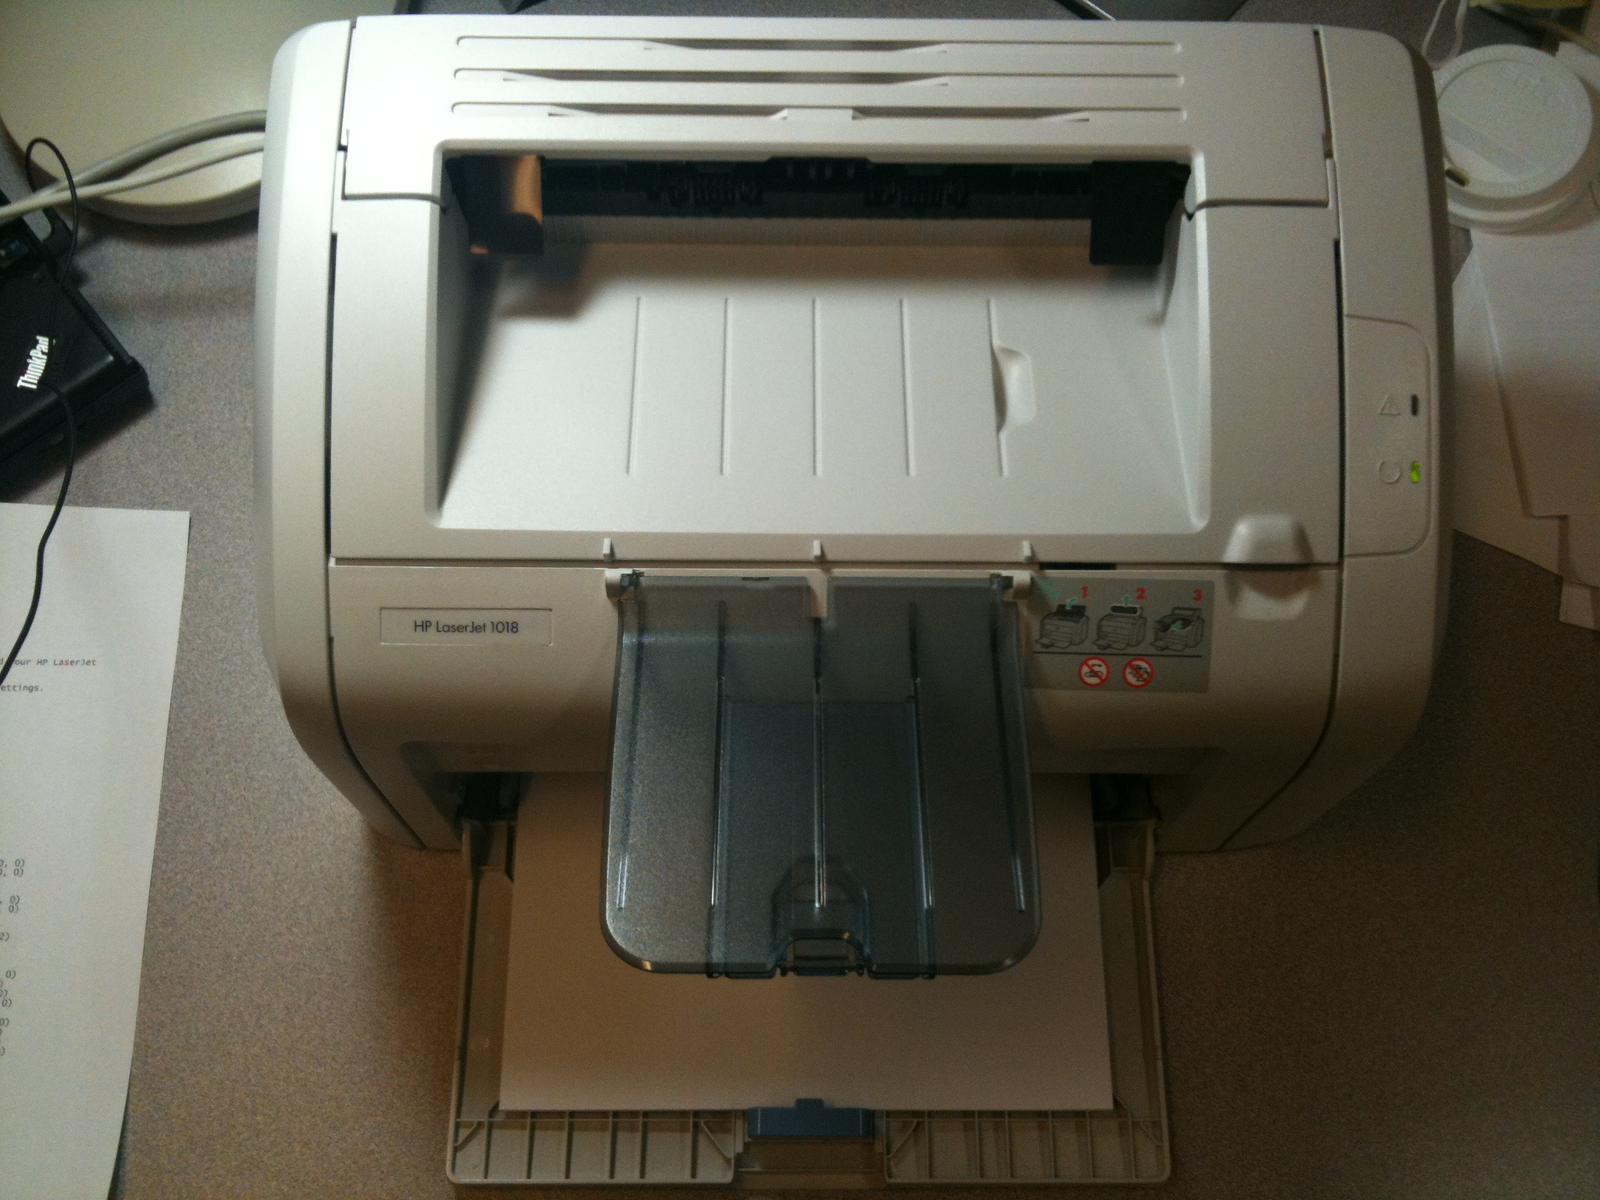 Collage Factory: Used HP LaserJet 1018 excellent condition for selling